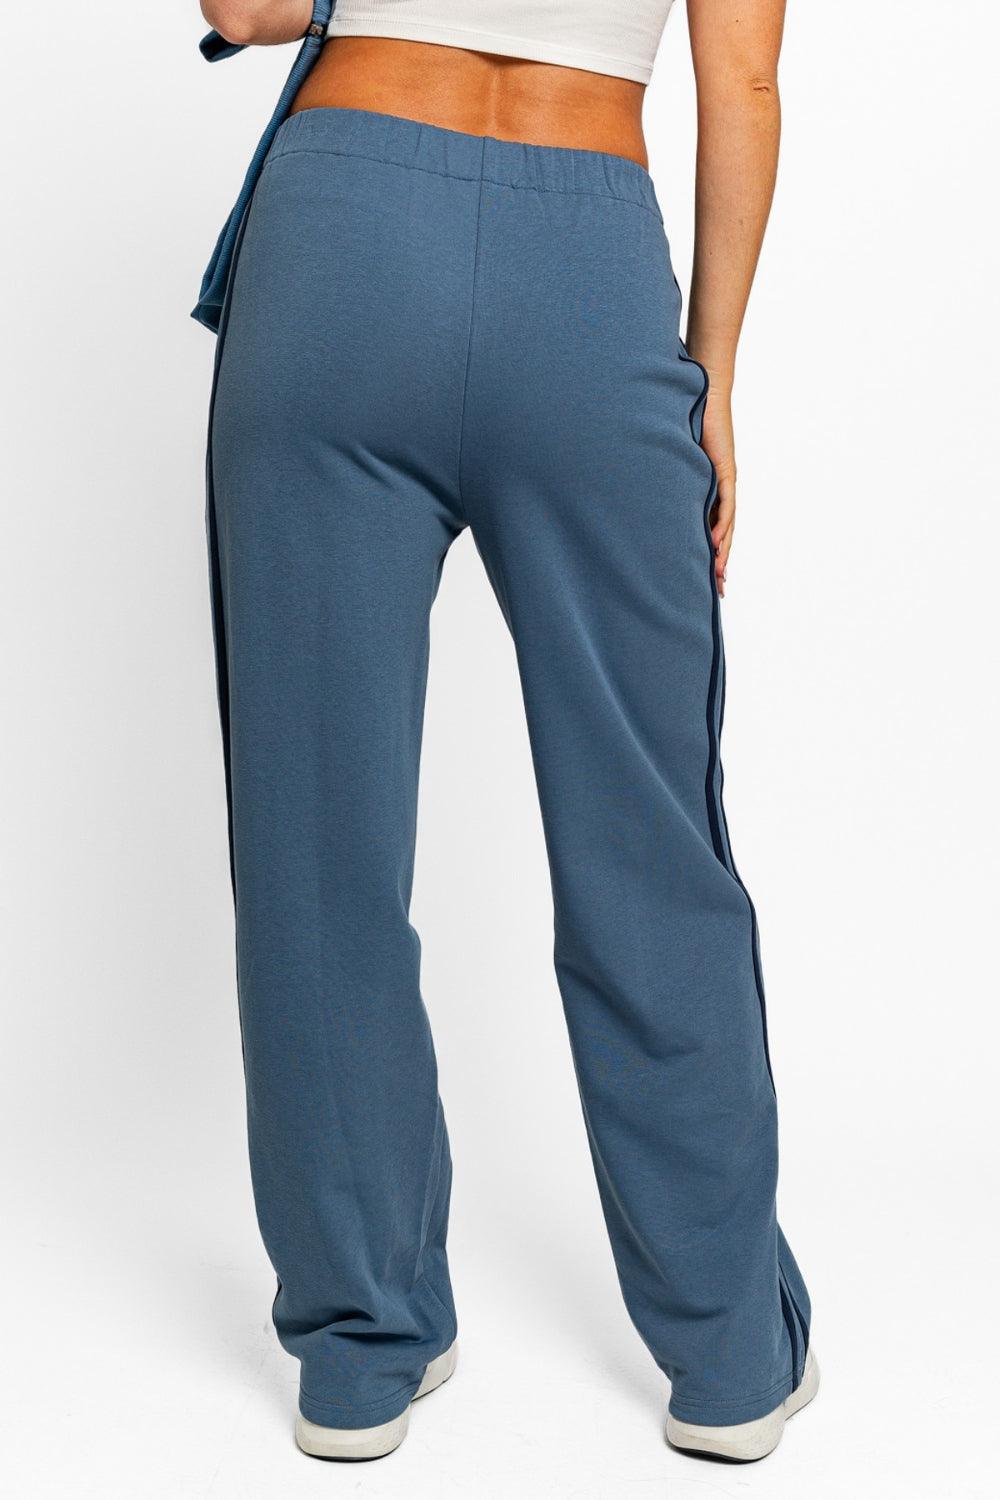 High Waisted Side Stripes Straight Track Sweatpants - Wildflower Hippies